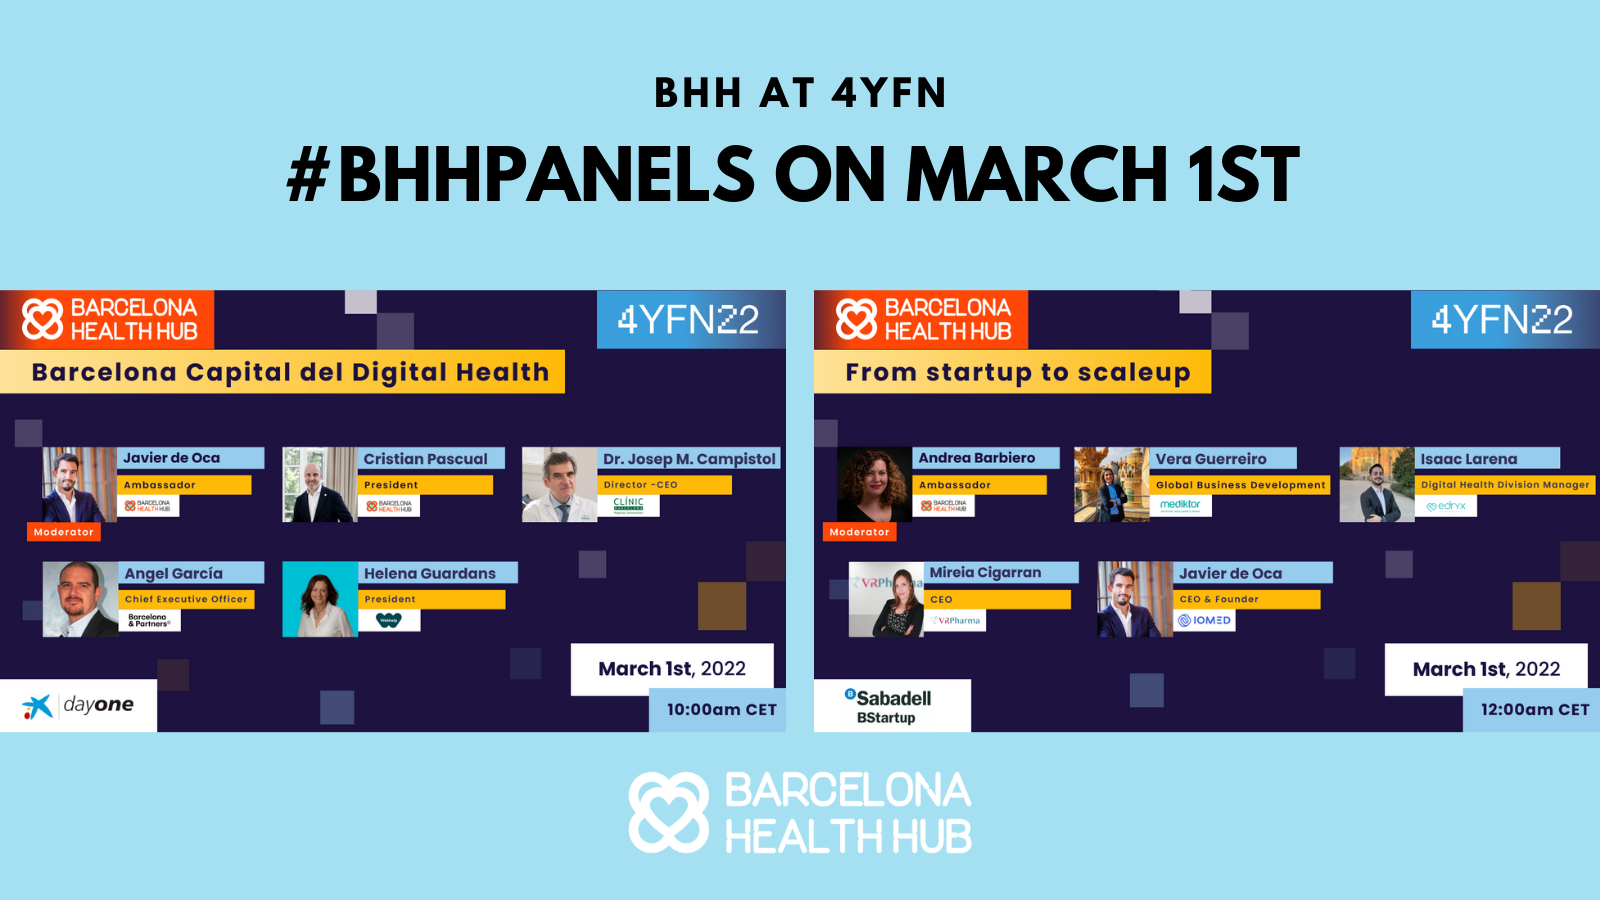 #BHHPanels at 4YFN – Check out the panels on Tuesday March 1st!